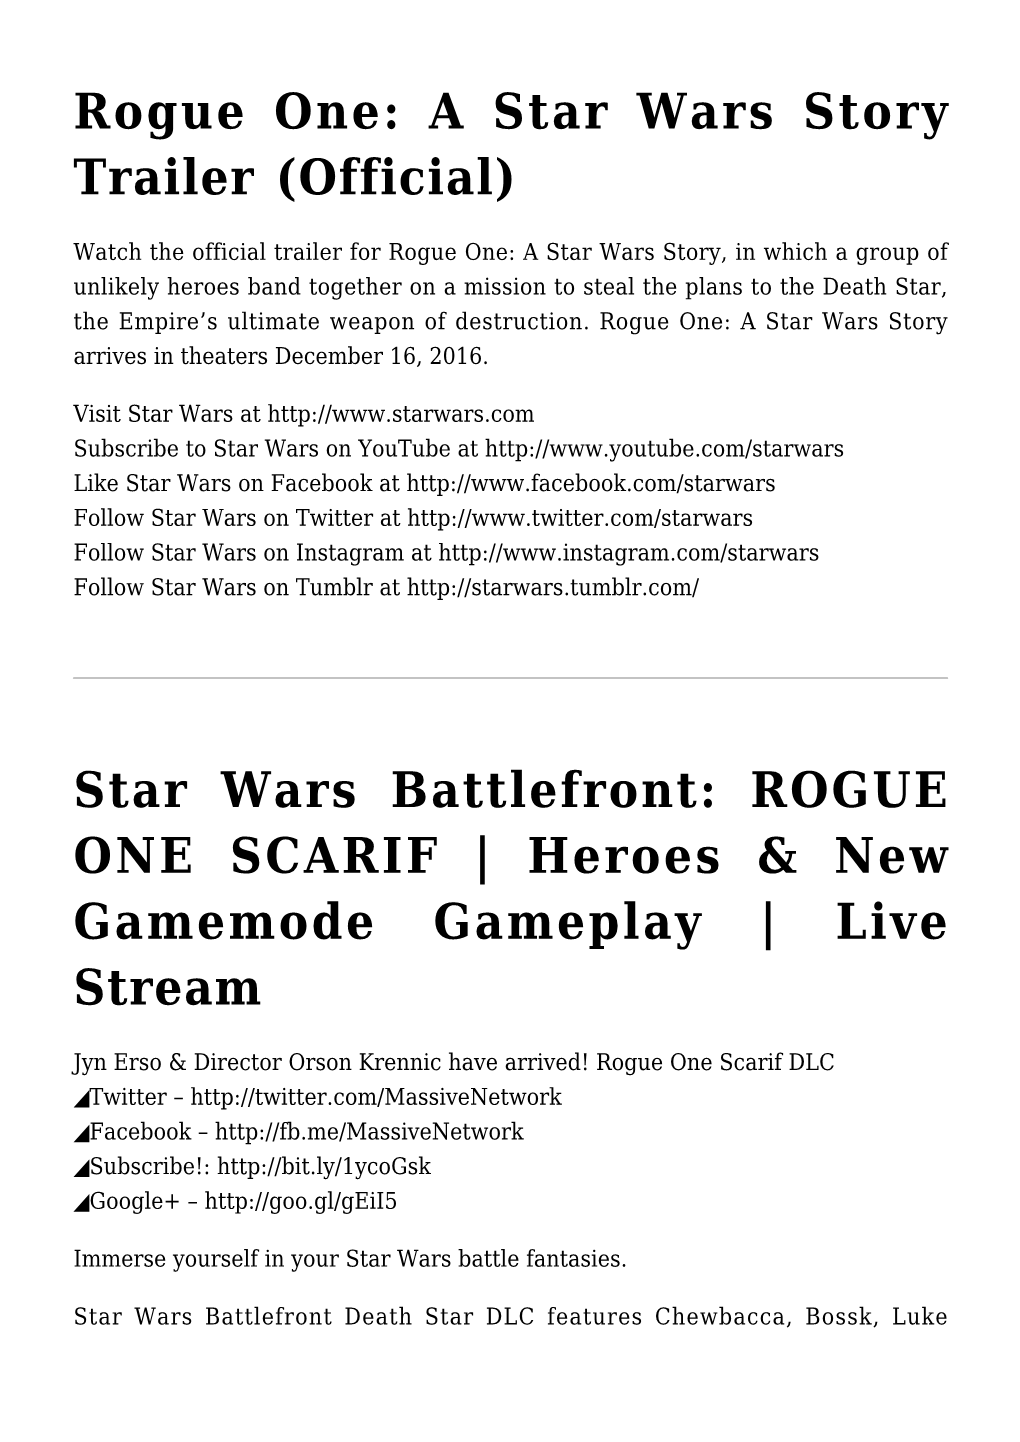 Star Wars Battlefront: ROGUE ONE SCARIF | Heroes & New Gamemode Gameplay | Live Stream